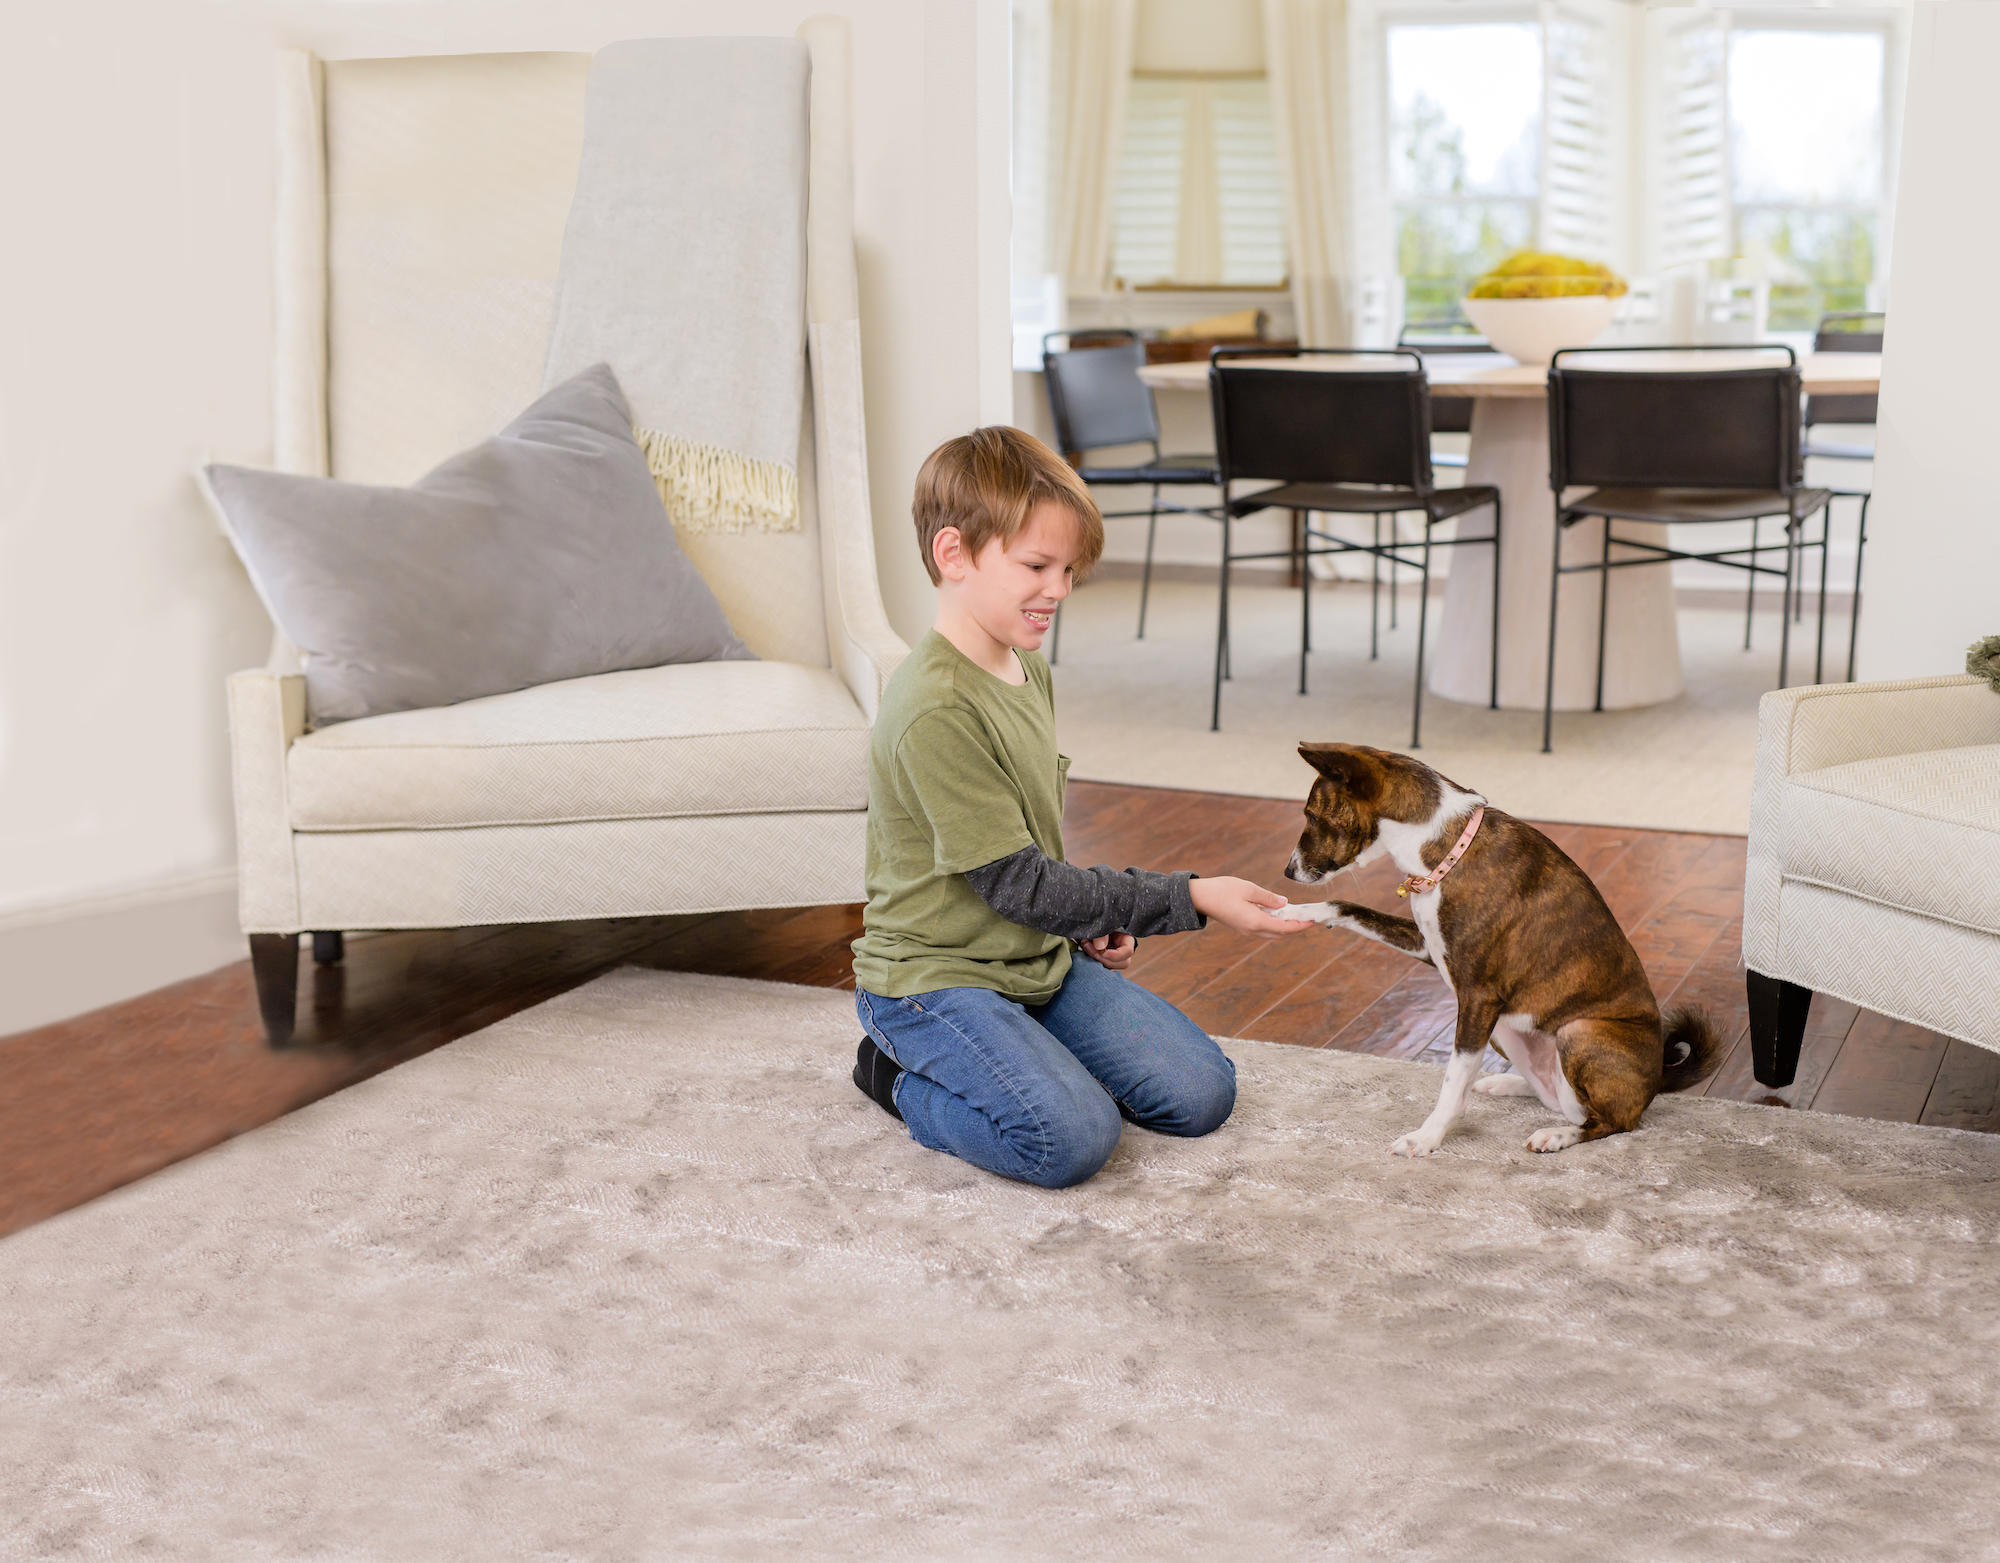 boy playing with. a puppy on an area rug